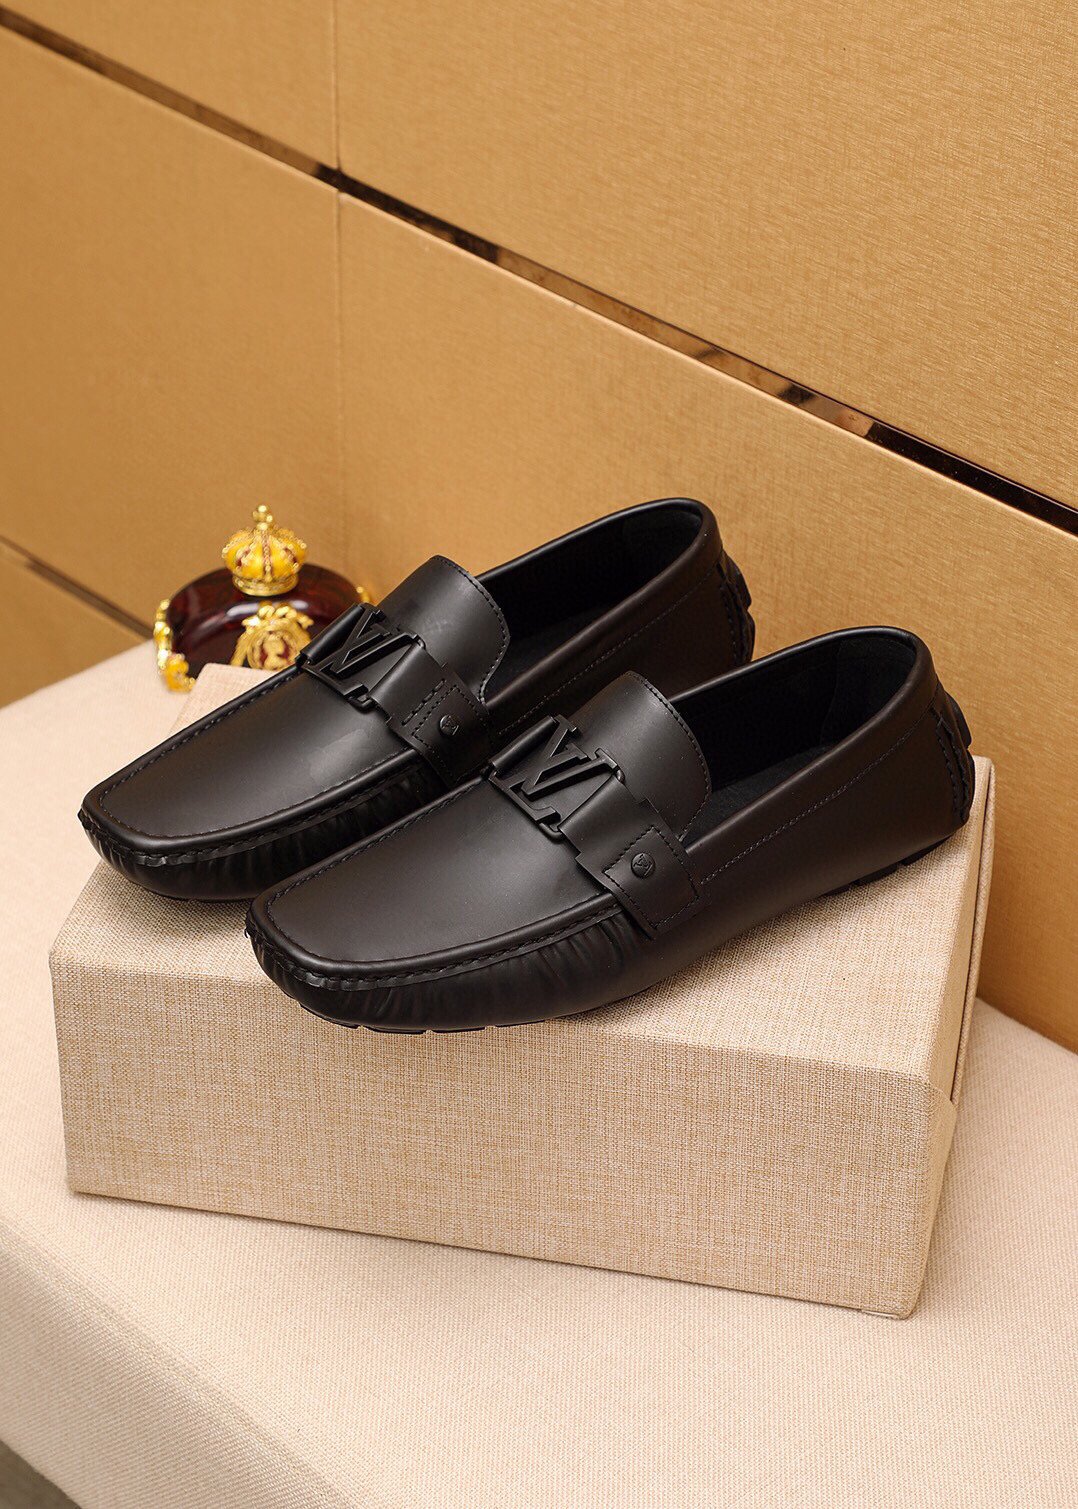 LV Louis Vuitton BEST QUALITY Men's Leather Fashion Loafers 